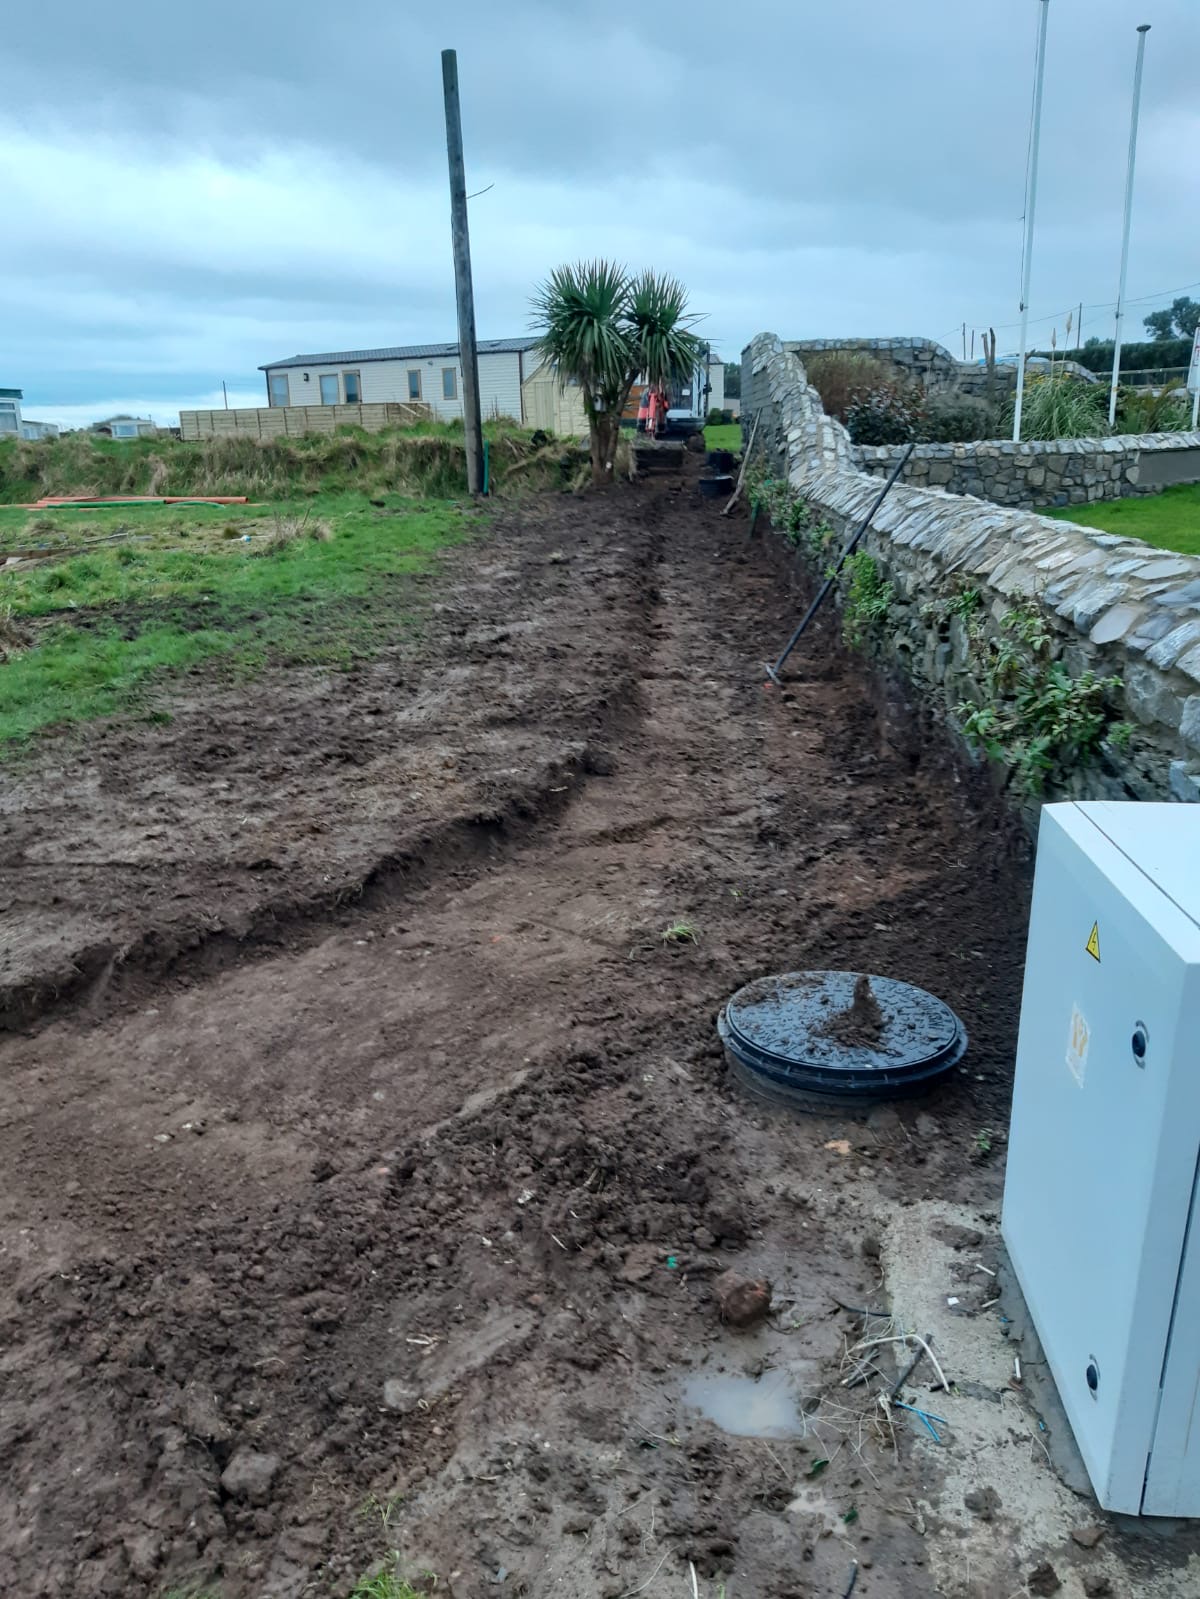 Lynders Mobile Home Park, New Entrance 2021 - Portrane, Donabate, North County Dublin